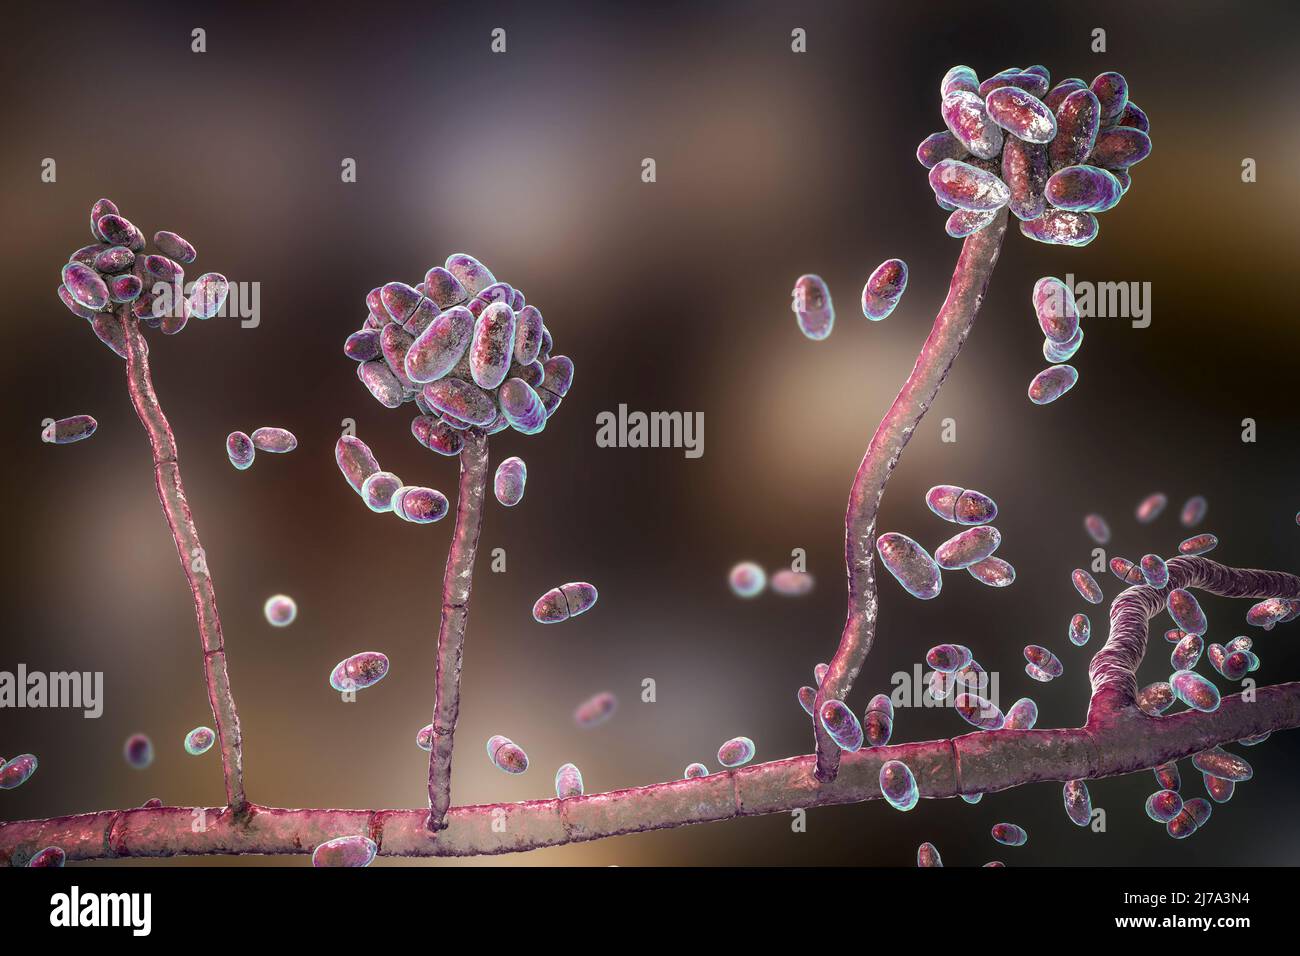 Fungus infection Cut Out Stock Images & Pictures - Page 2 - Alamy